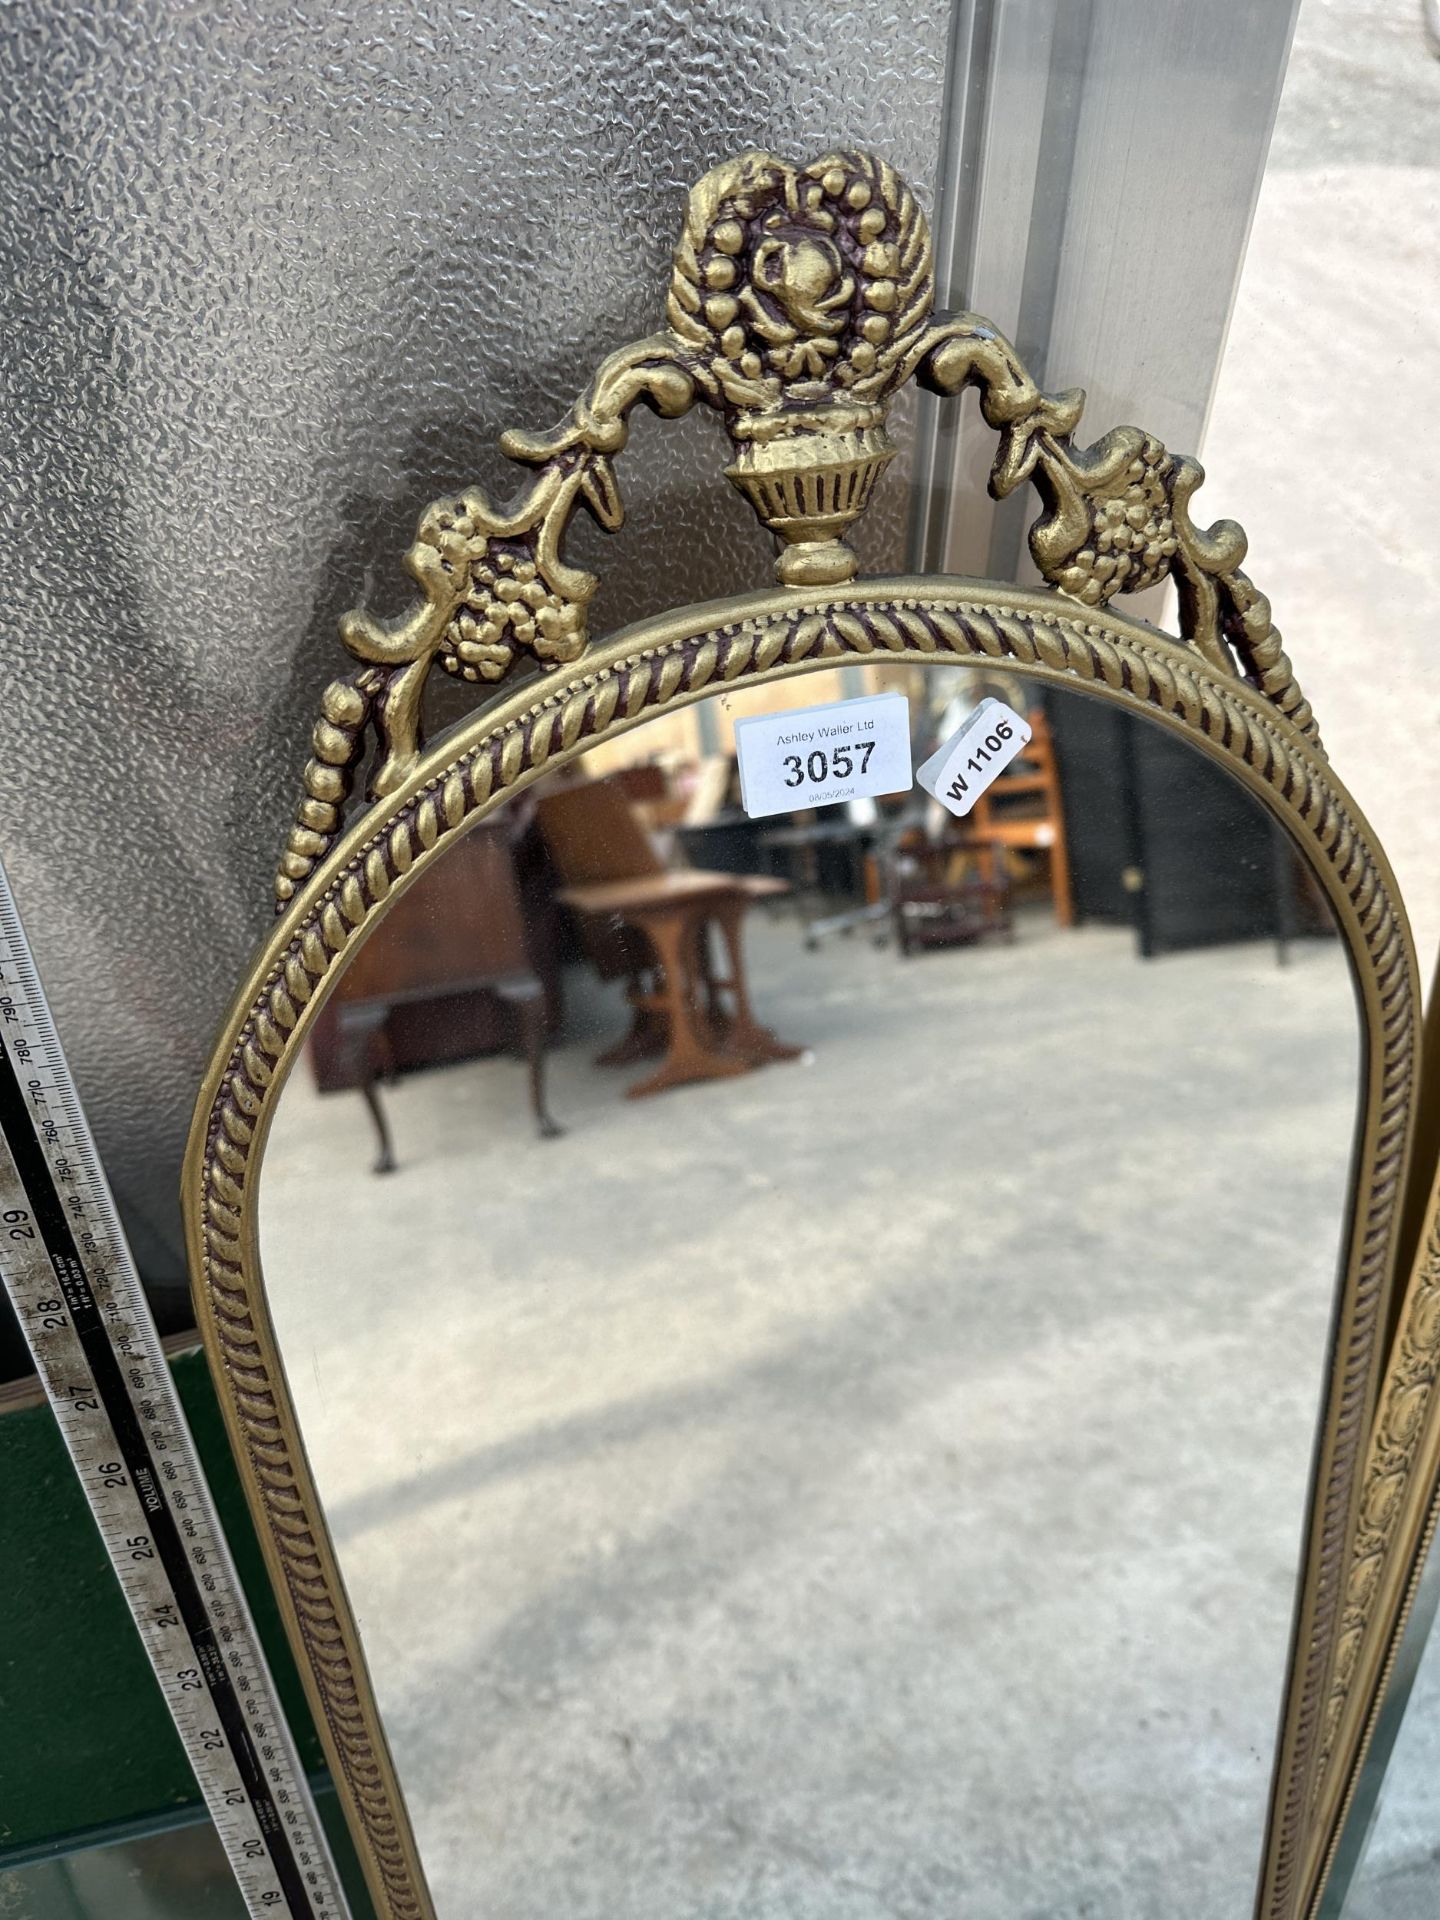 TWO GILT FRAMED MIRRORS - ONE RECTANGULAR, ONE WITH DECORATIVE ARCHED TOP - Image 2 of 3